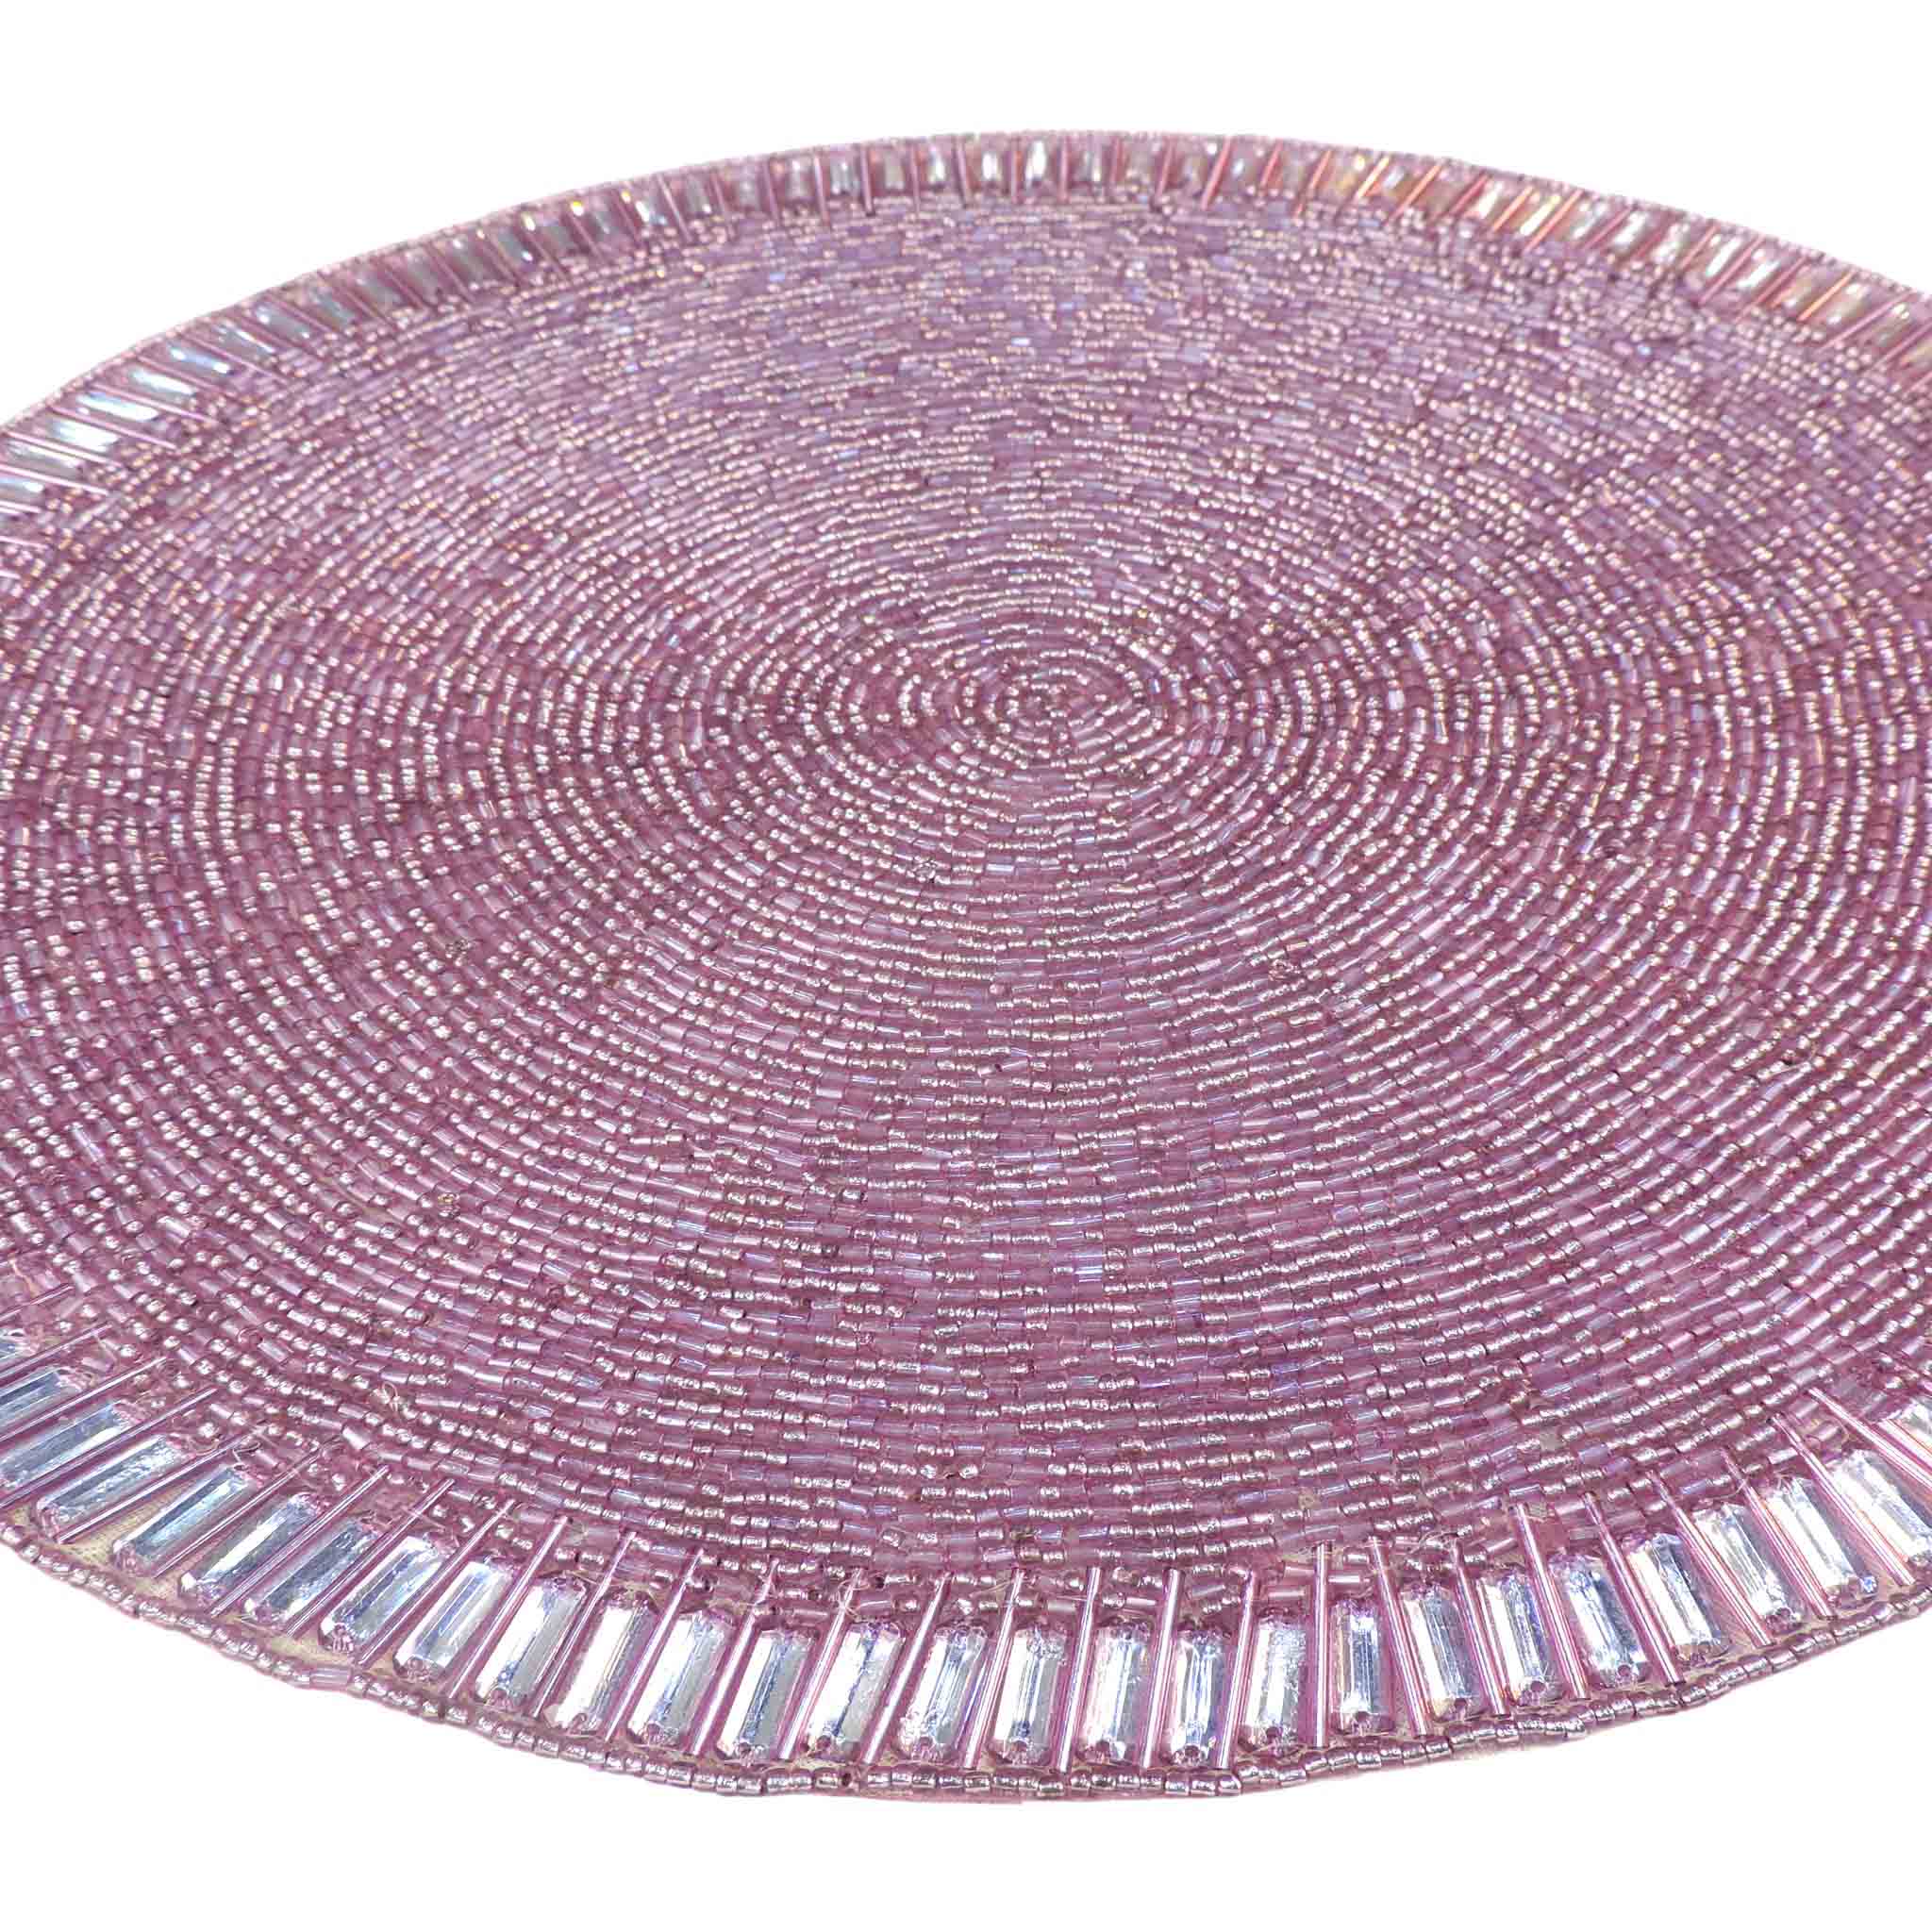 Glam Crystal Bead Embroidered Placemat in Pink, Set of 2/4